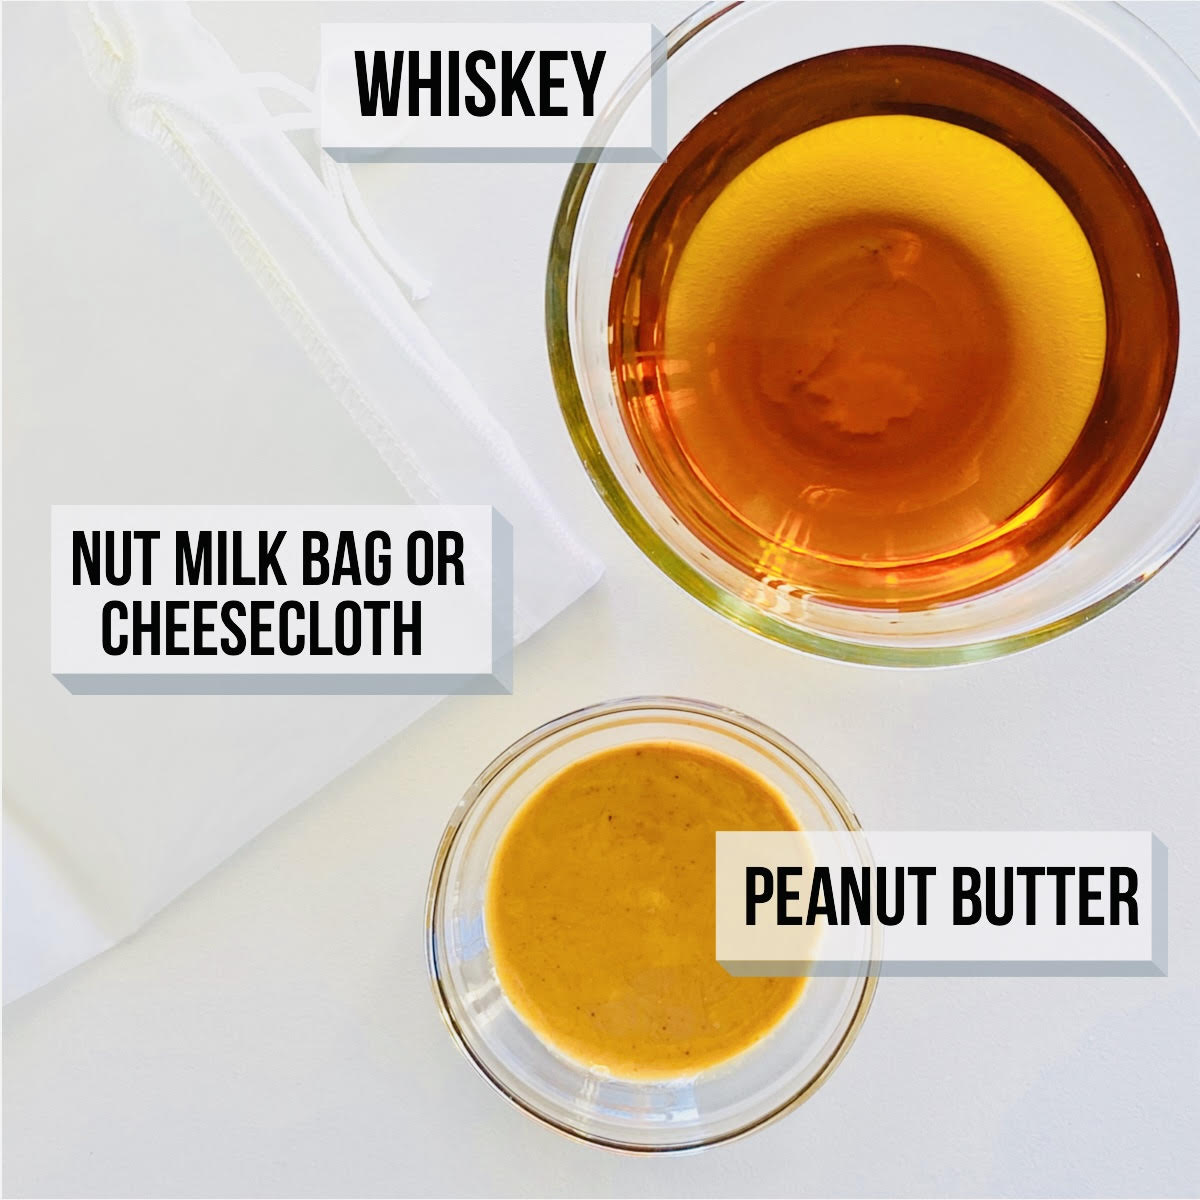 peanut butter whiskey ingredients labeled